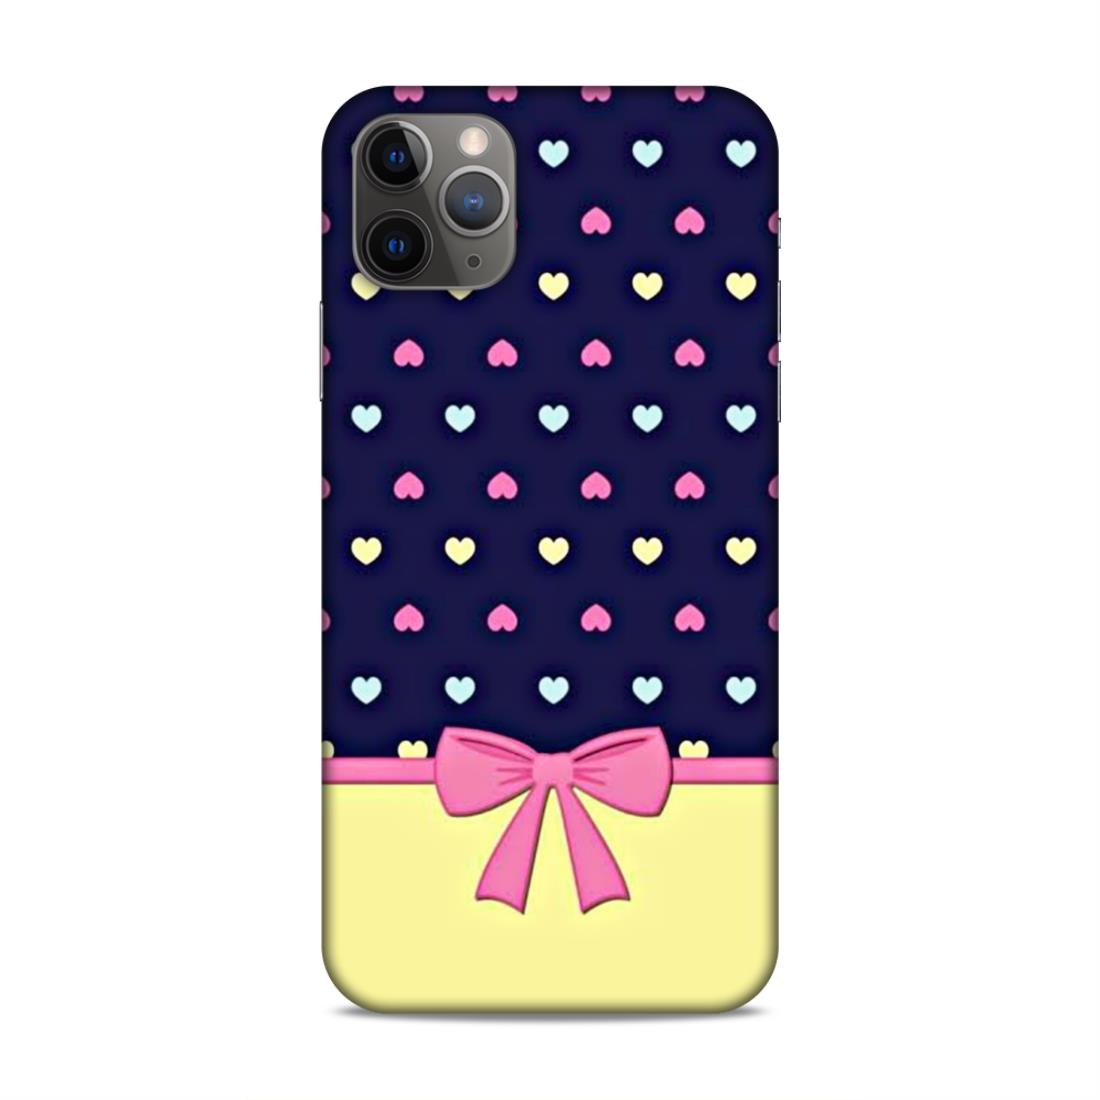 Heart Pattern with Bow Hard Back Case For Apple iPhone 11 Pro Max